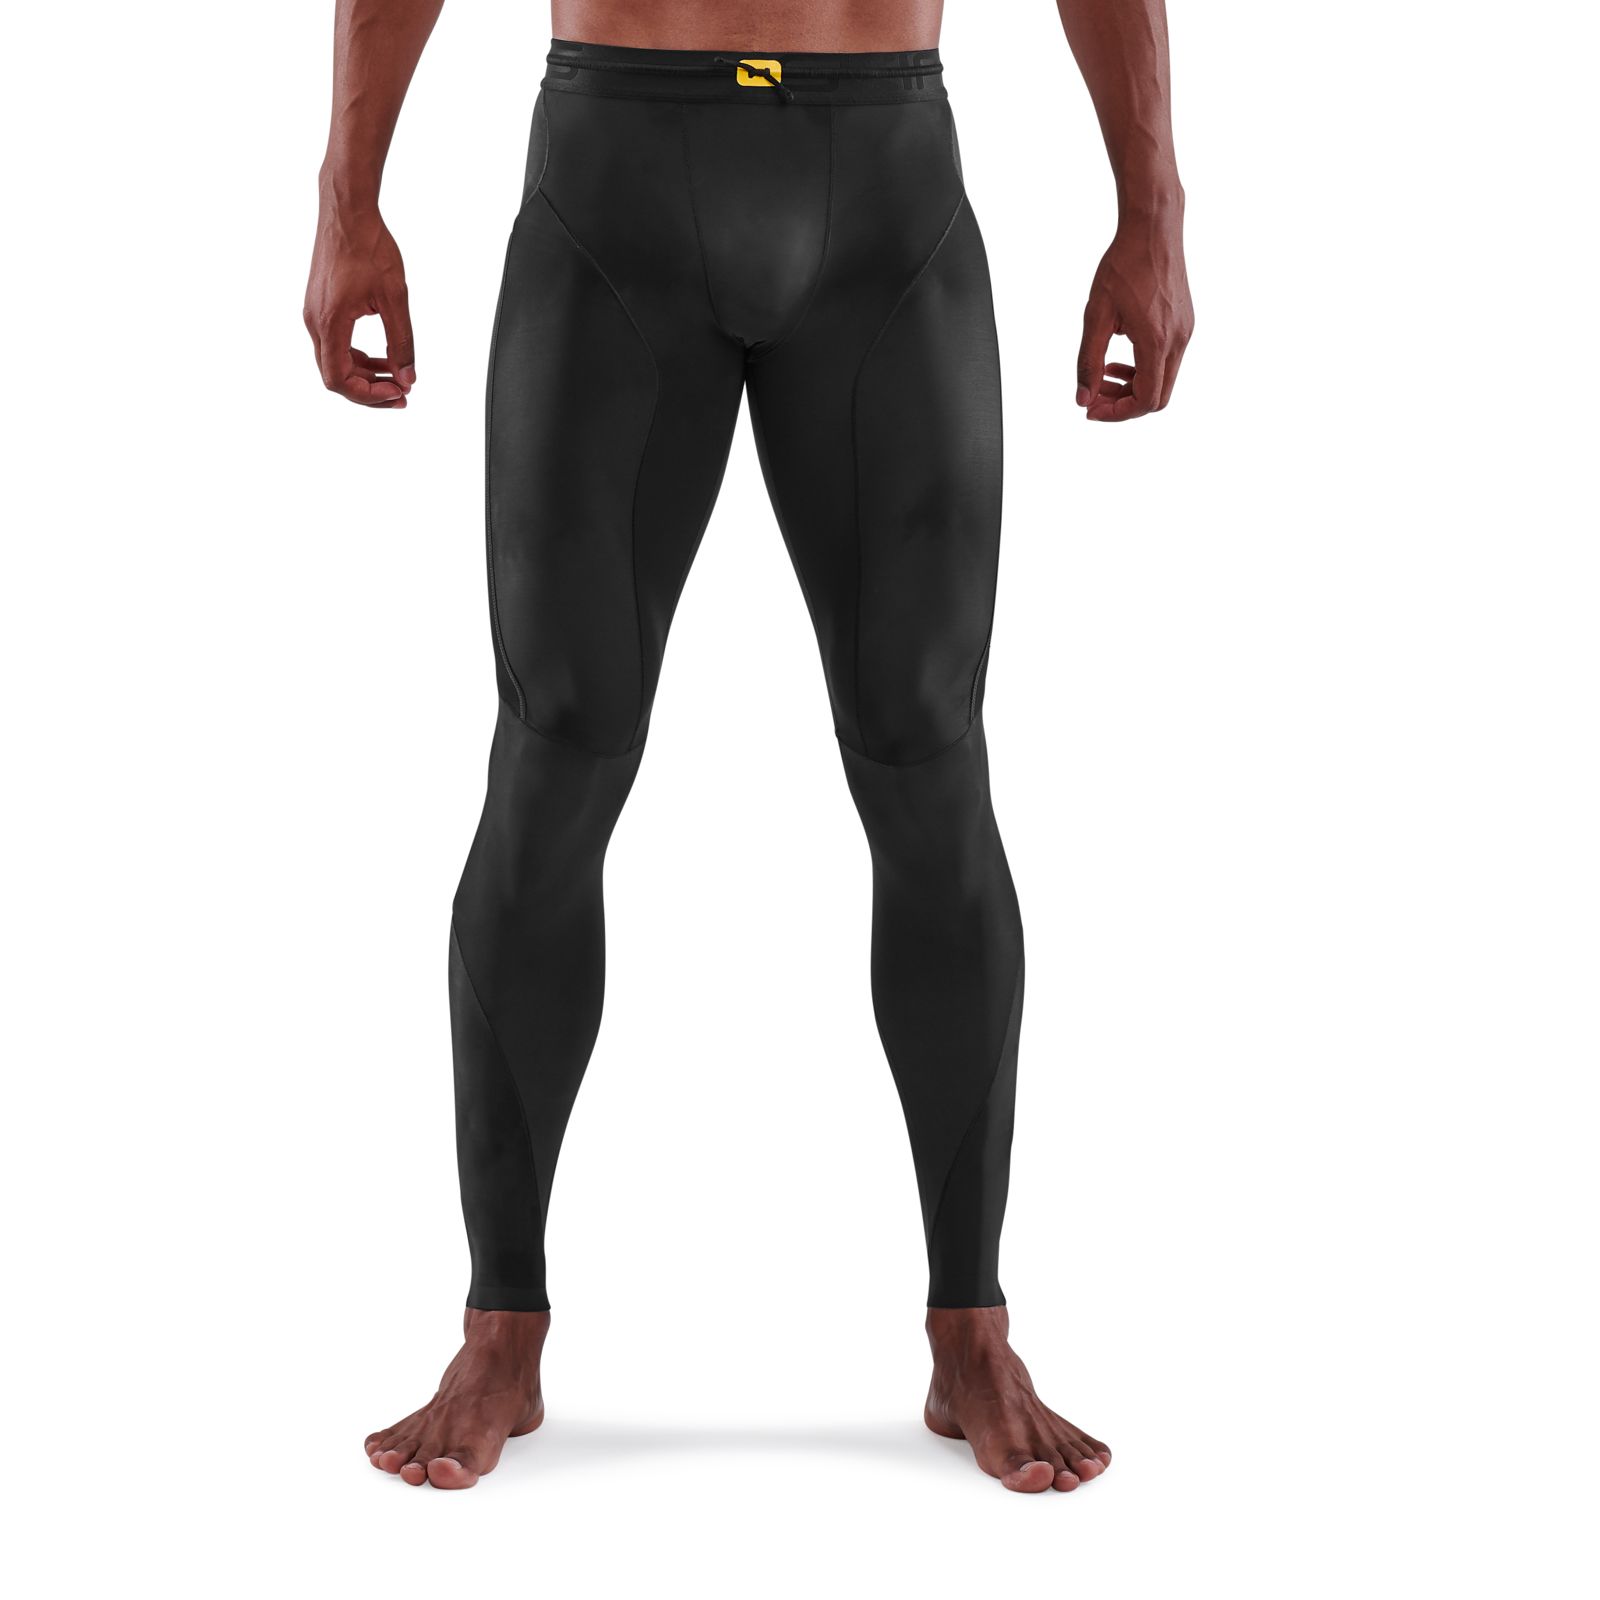 SKINS Men's A200 Compression Long Tights, Black/Yellow, X-Small, Activewear  -  Canada